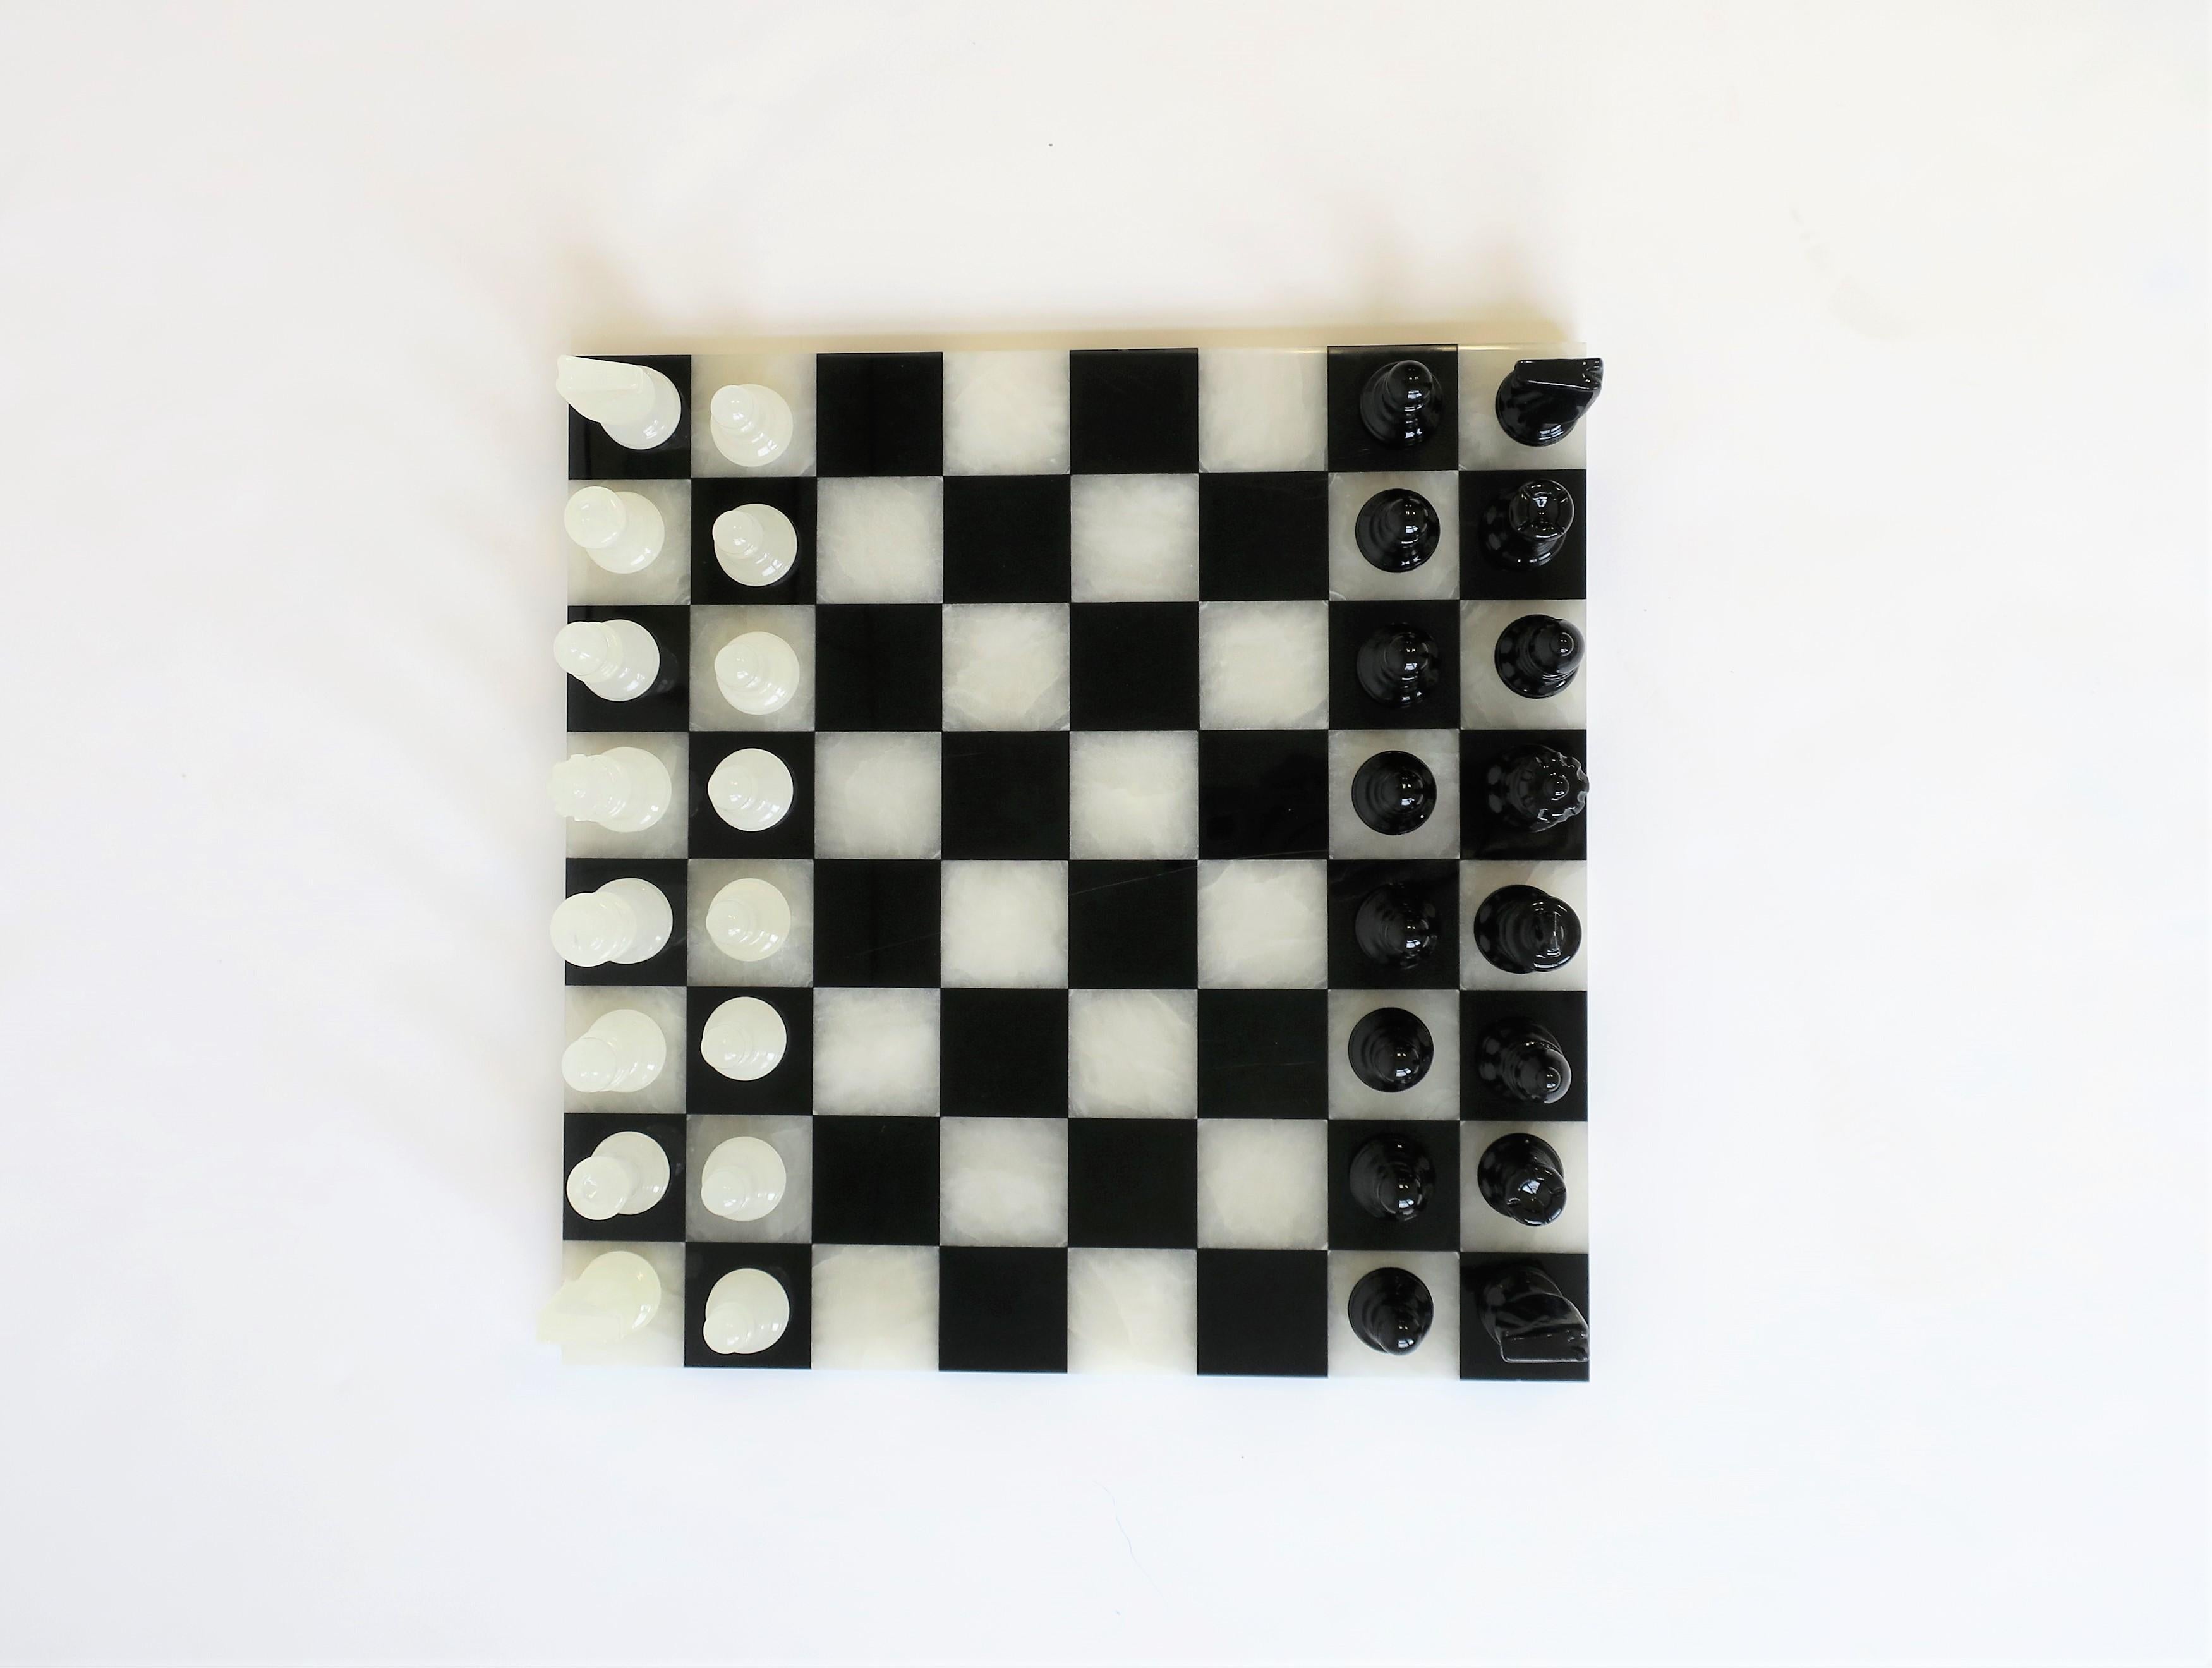 A chic black and white chess and tic-tac-toe game set, with onyx and acrylic pieces, circa late 20th century. Game includes 'rules' for chess as show in images. Complete set includes black wood game box, onyx and acrylic board, and all pieces (onyx